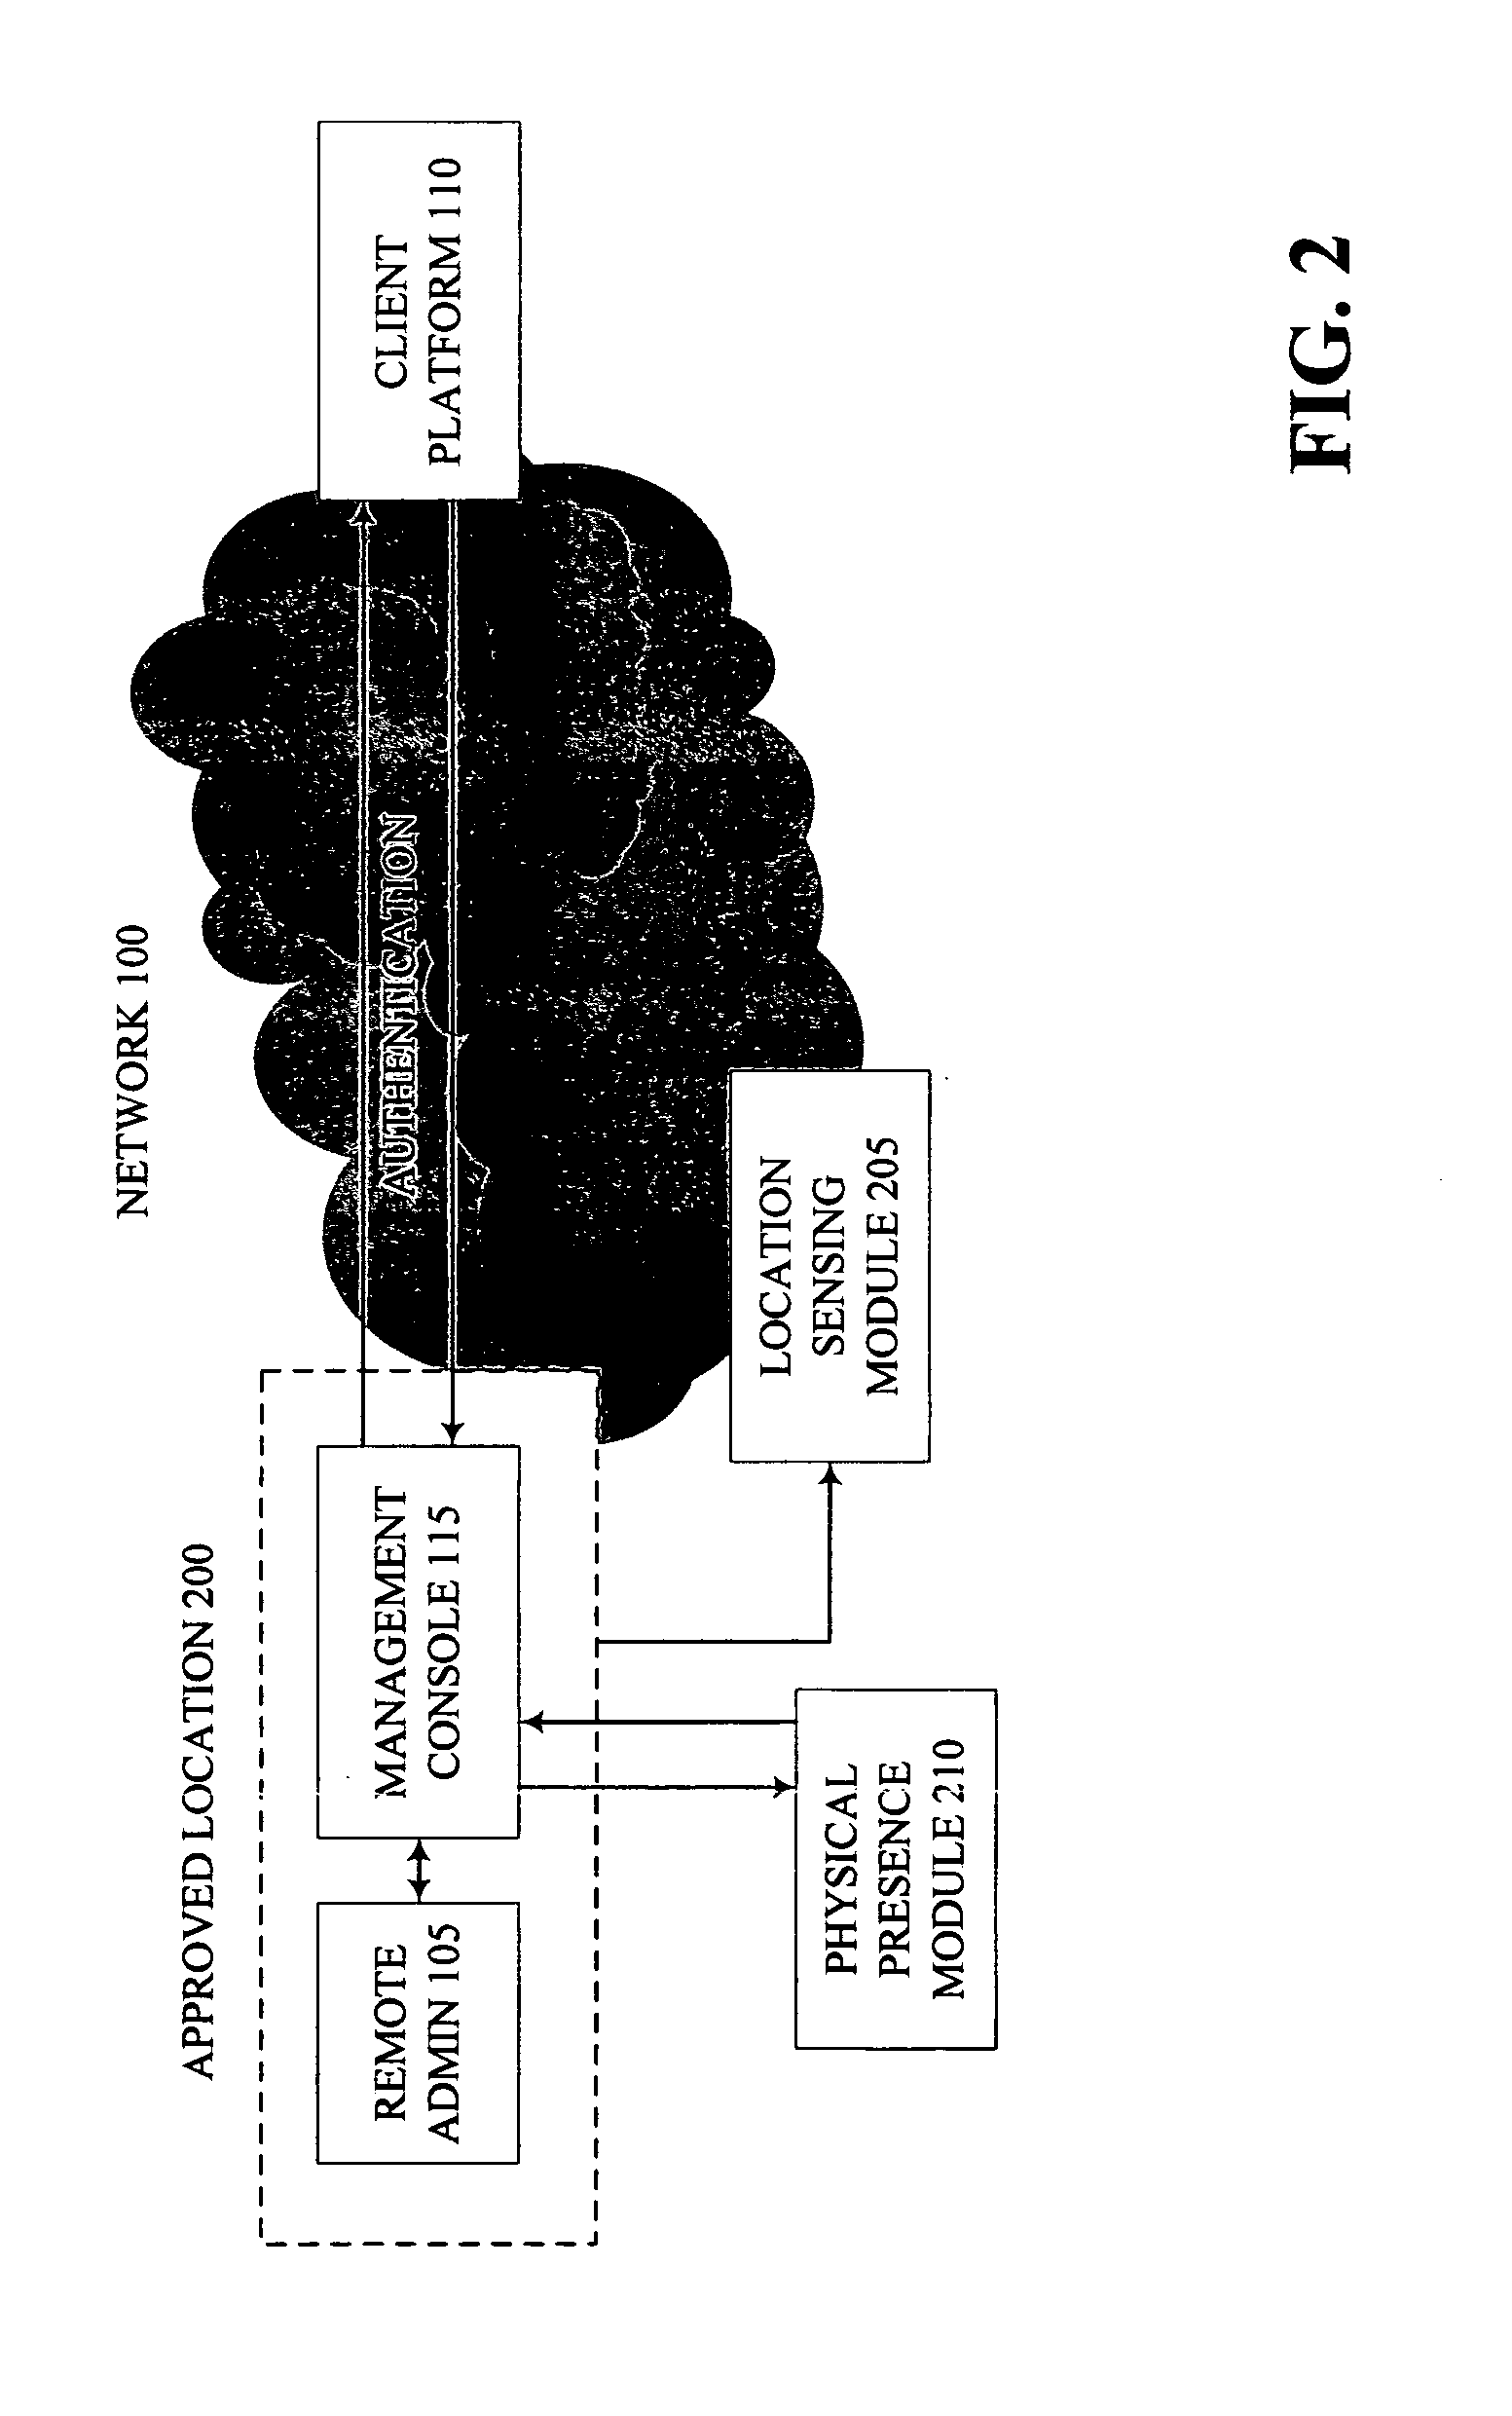 Method, apparatus and system for providing stronger authentication by extending physical presence to a remote entity